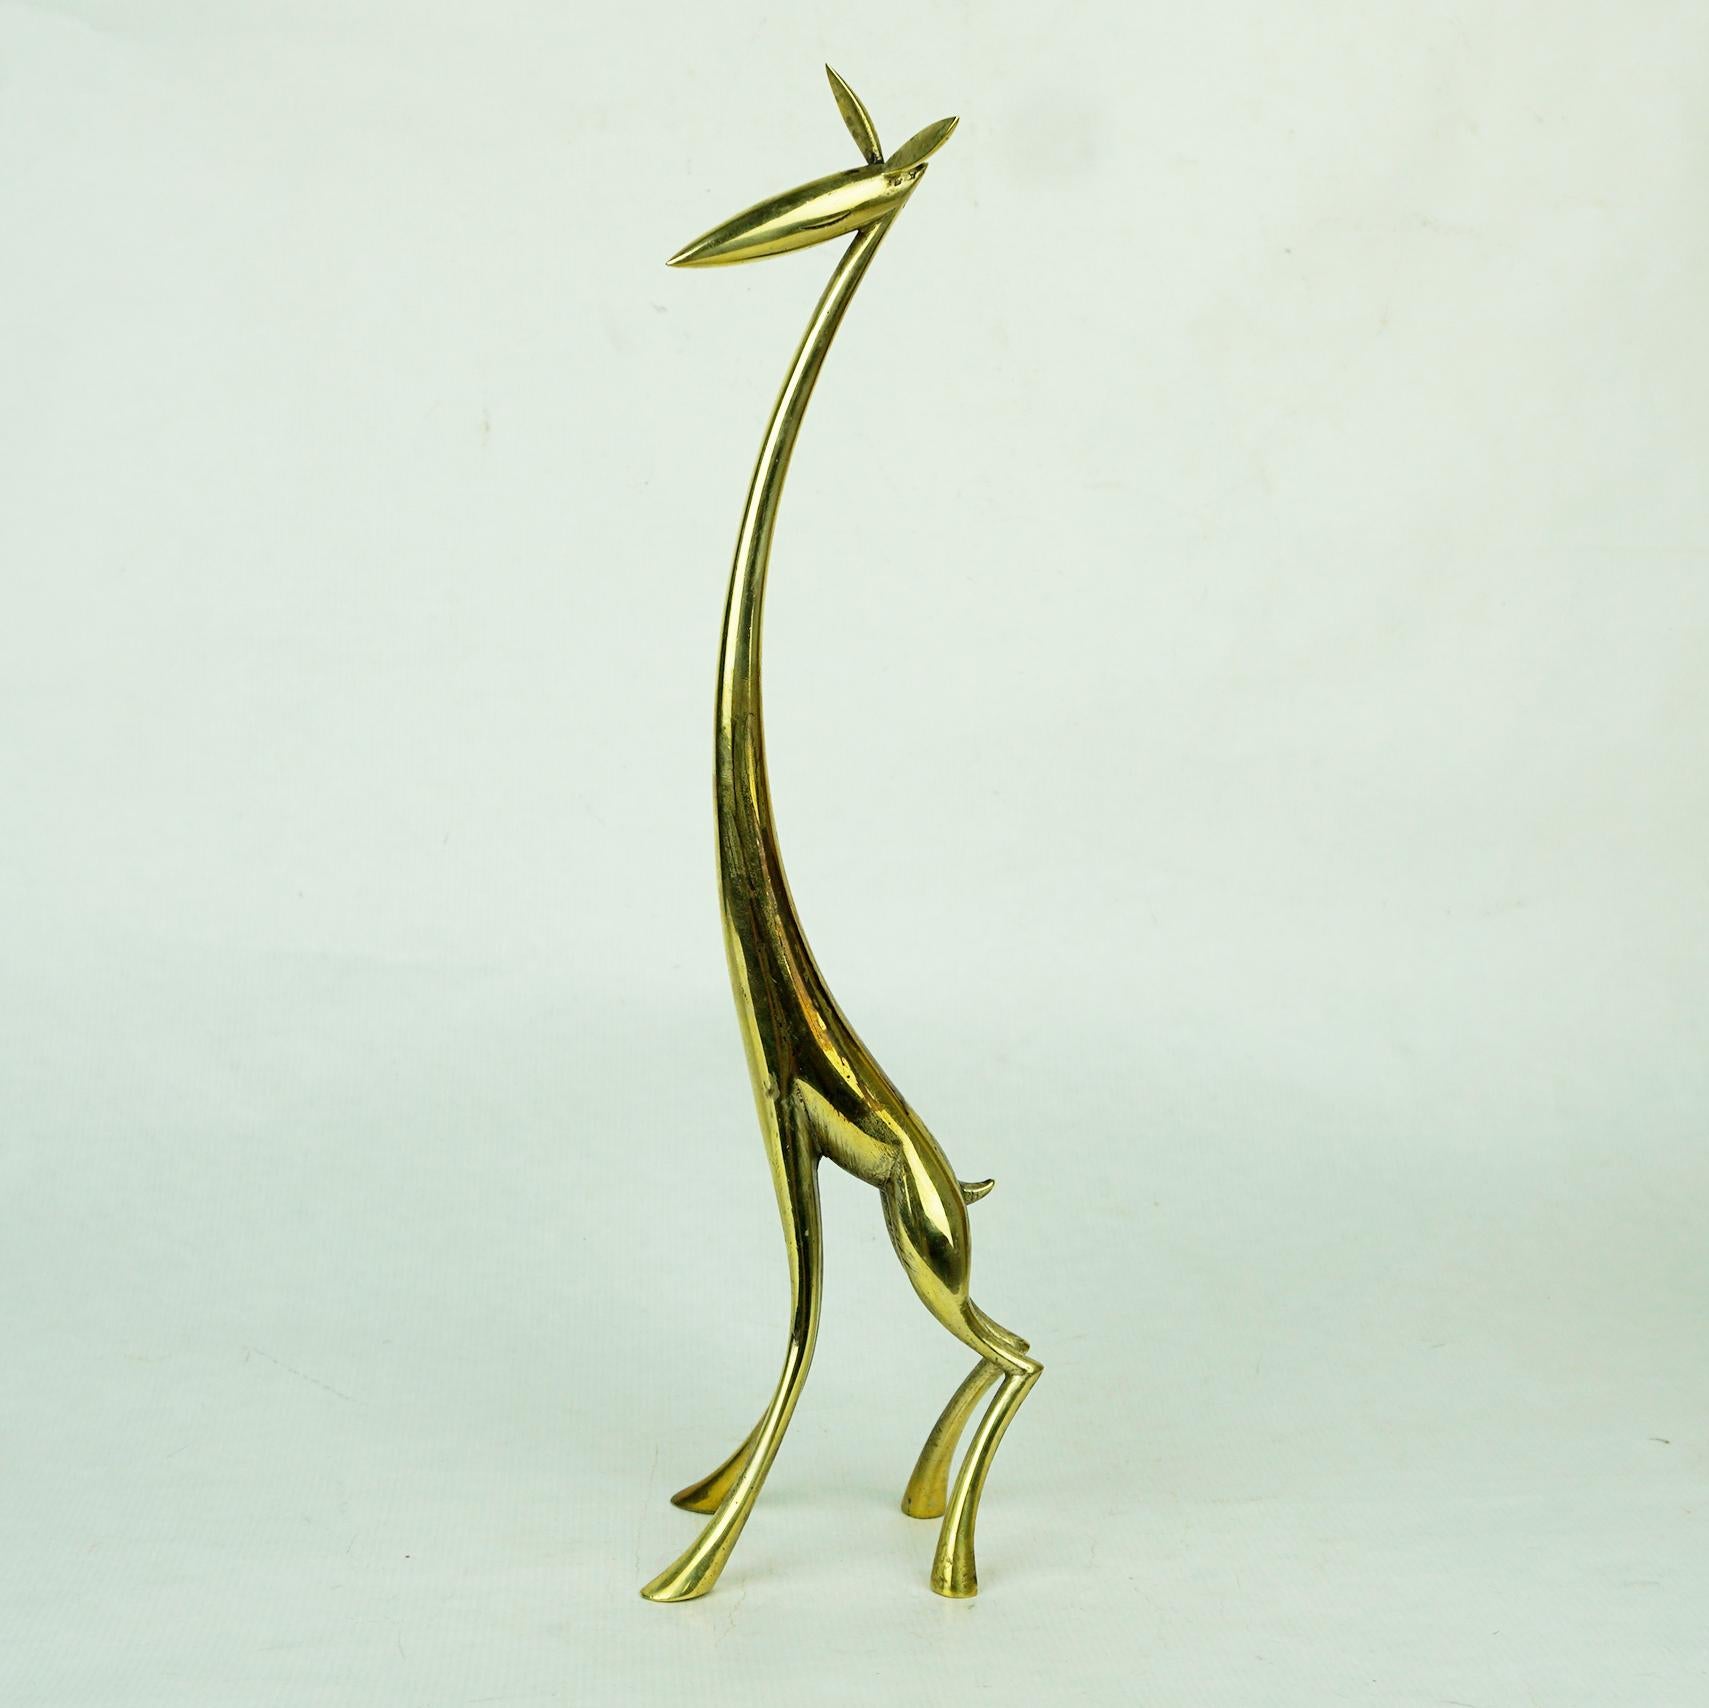 Amazing iconic brass animal sculpture designed by Karl Hagenauer and manufactured by Werkstätte Hagenauer Vienna in the 1930s, marked on the underside of its legs Hagenauer Wien, WHW, made in Austria.